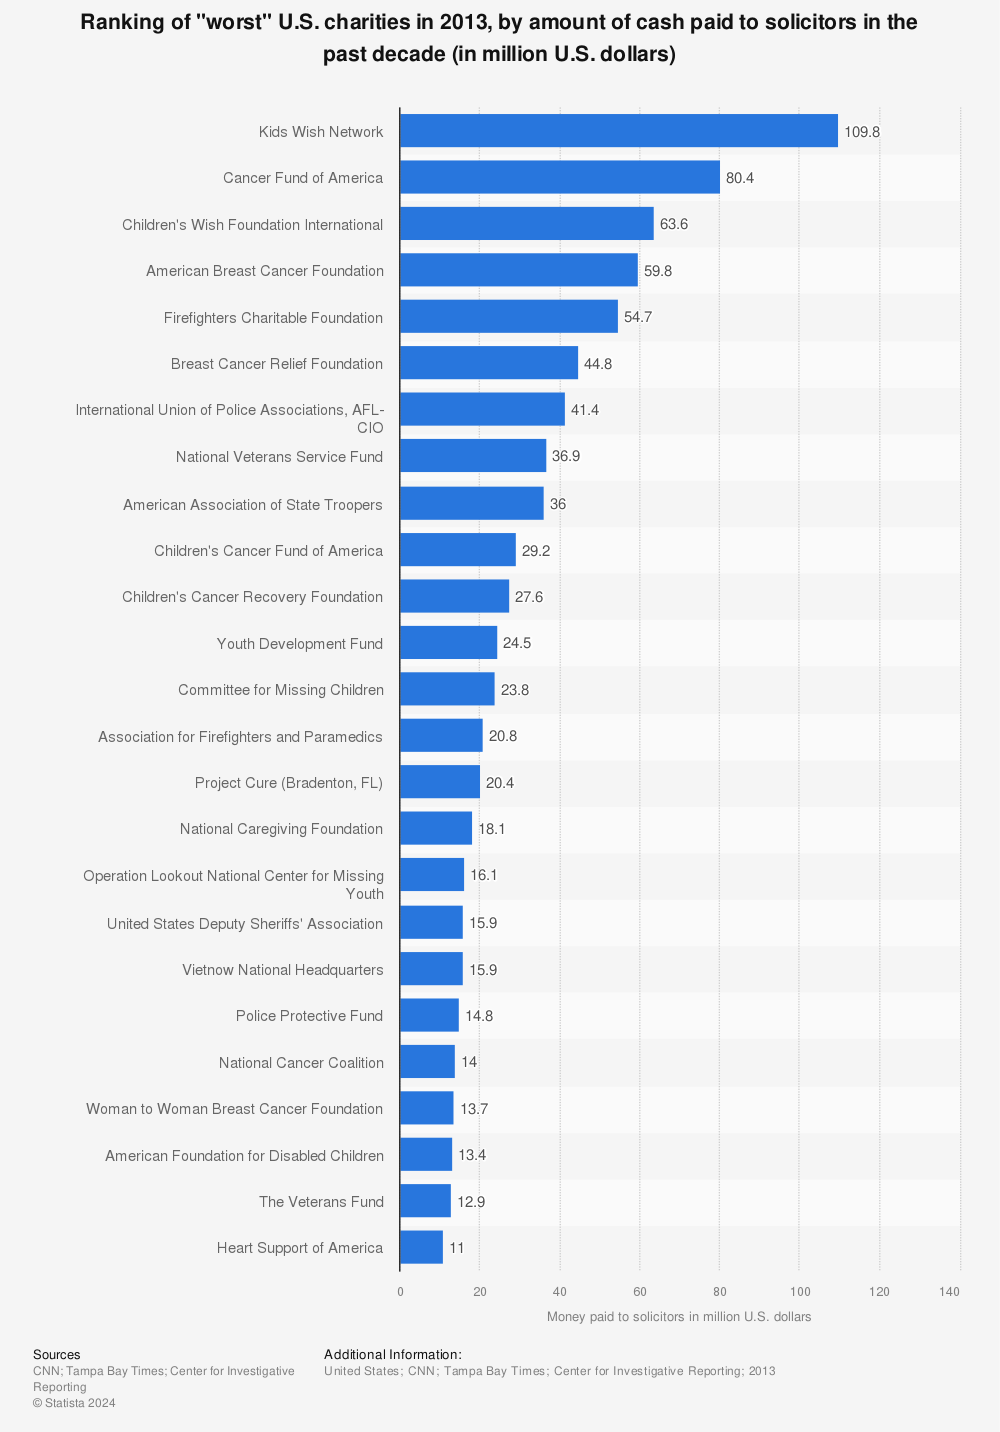 Statistic: Ranking of "worst" U.S. charities in 2013, by amount of cash paid to solicitors in the past decade (in million U.S. dollars) | Statista